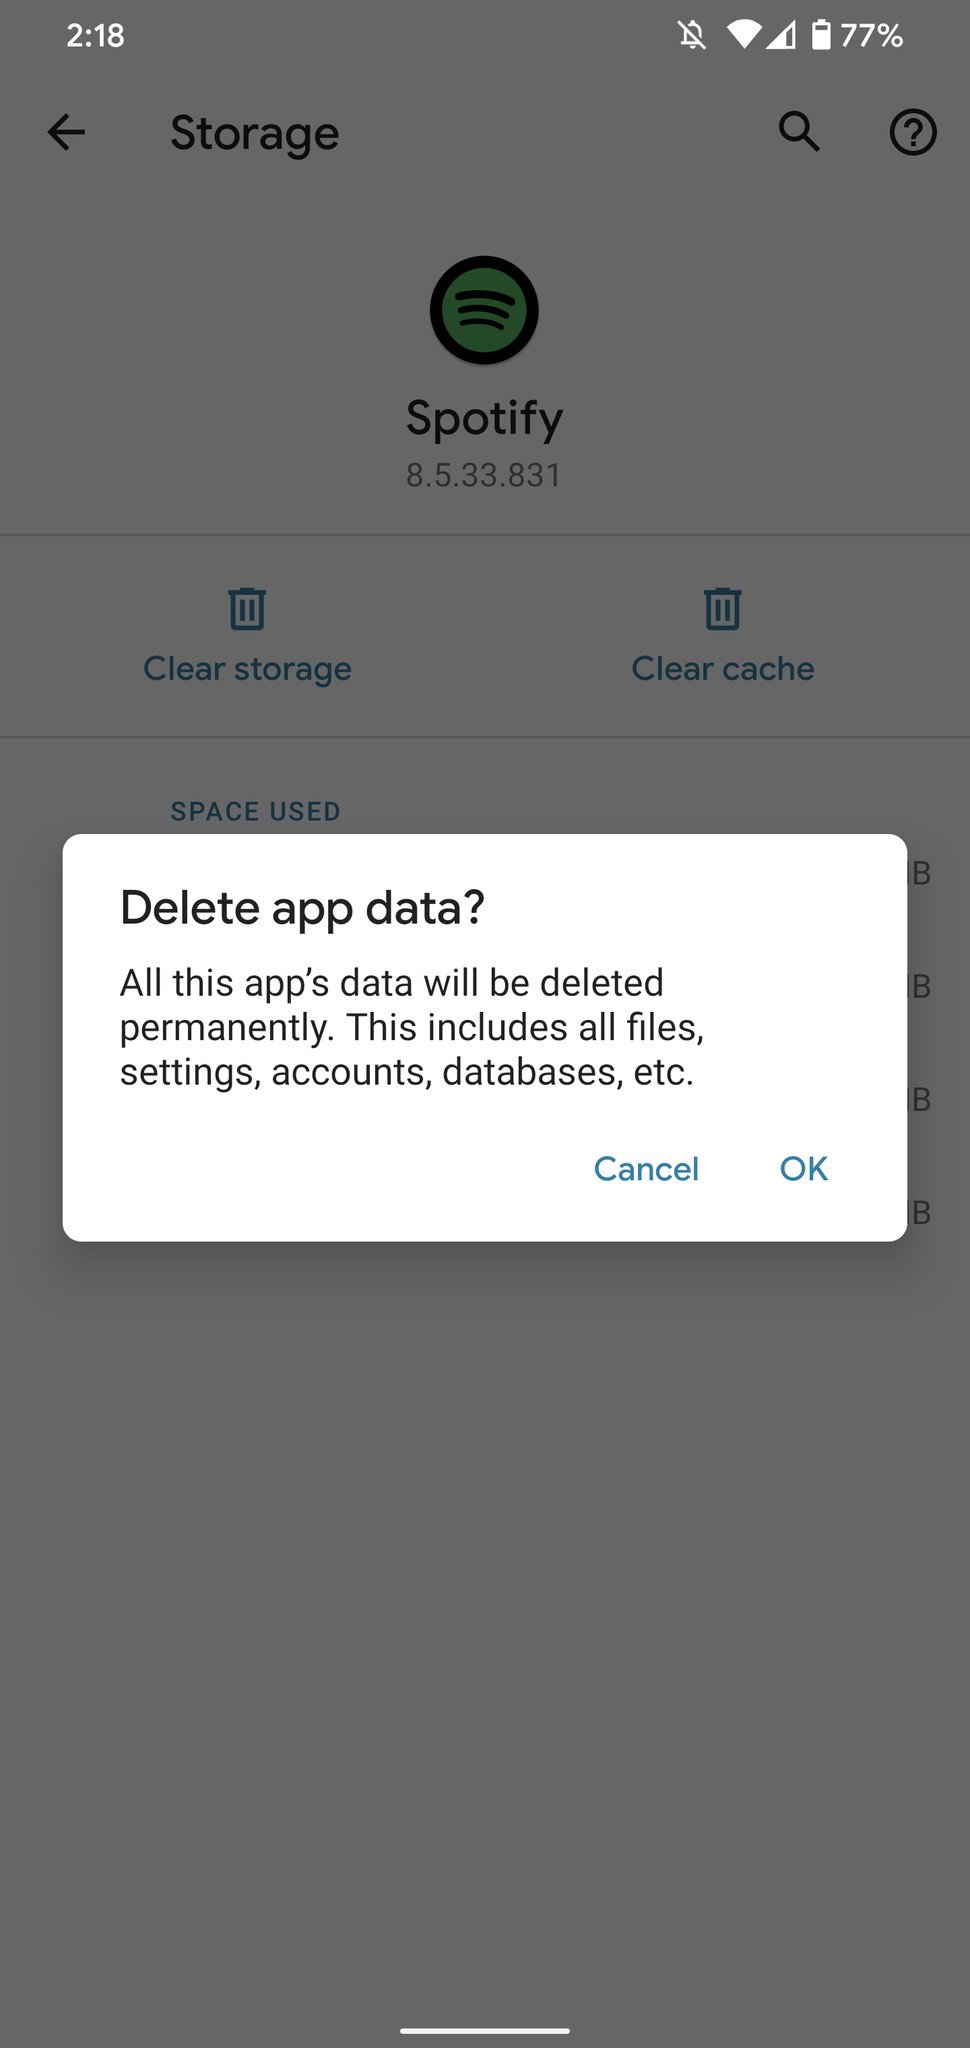 Clearing app data for the Spotify app